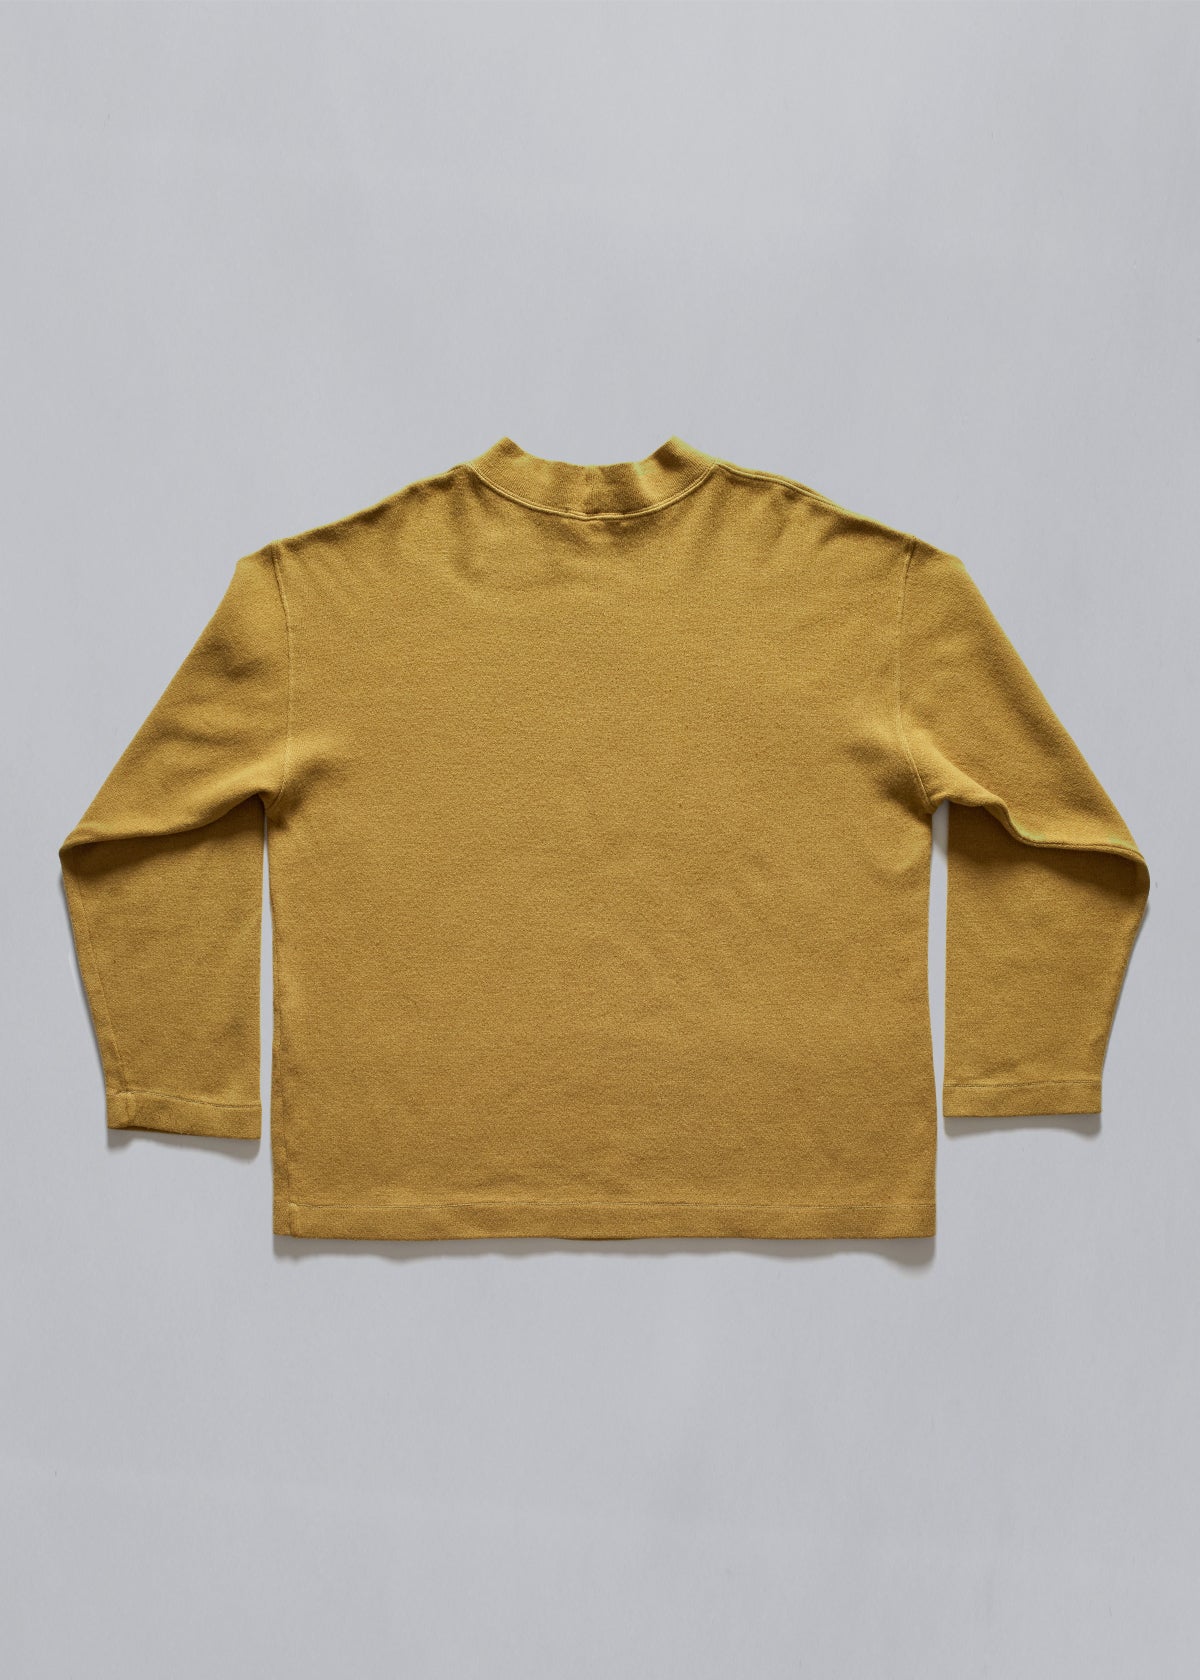 Mustard Crewneck Sweater AW1994 - Large - The Archivist Store